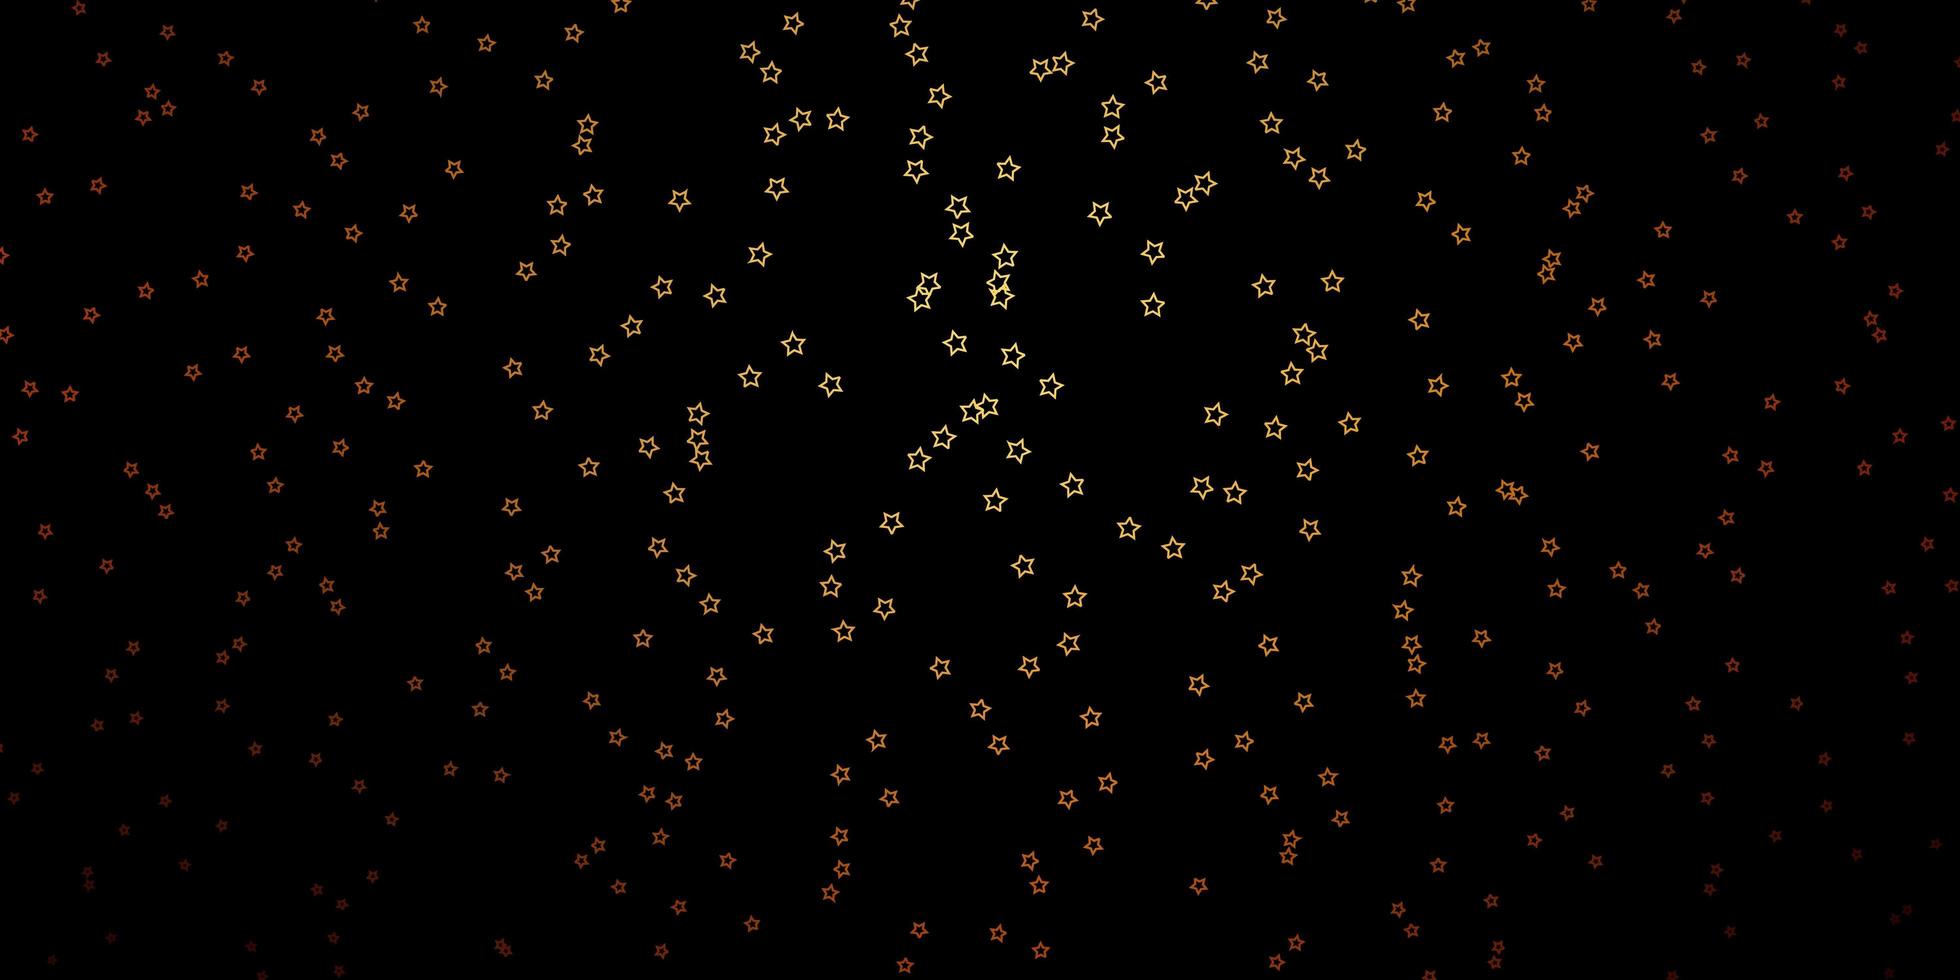 Dark Yellow vector pattern with abstract stars.